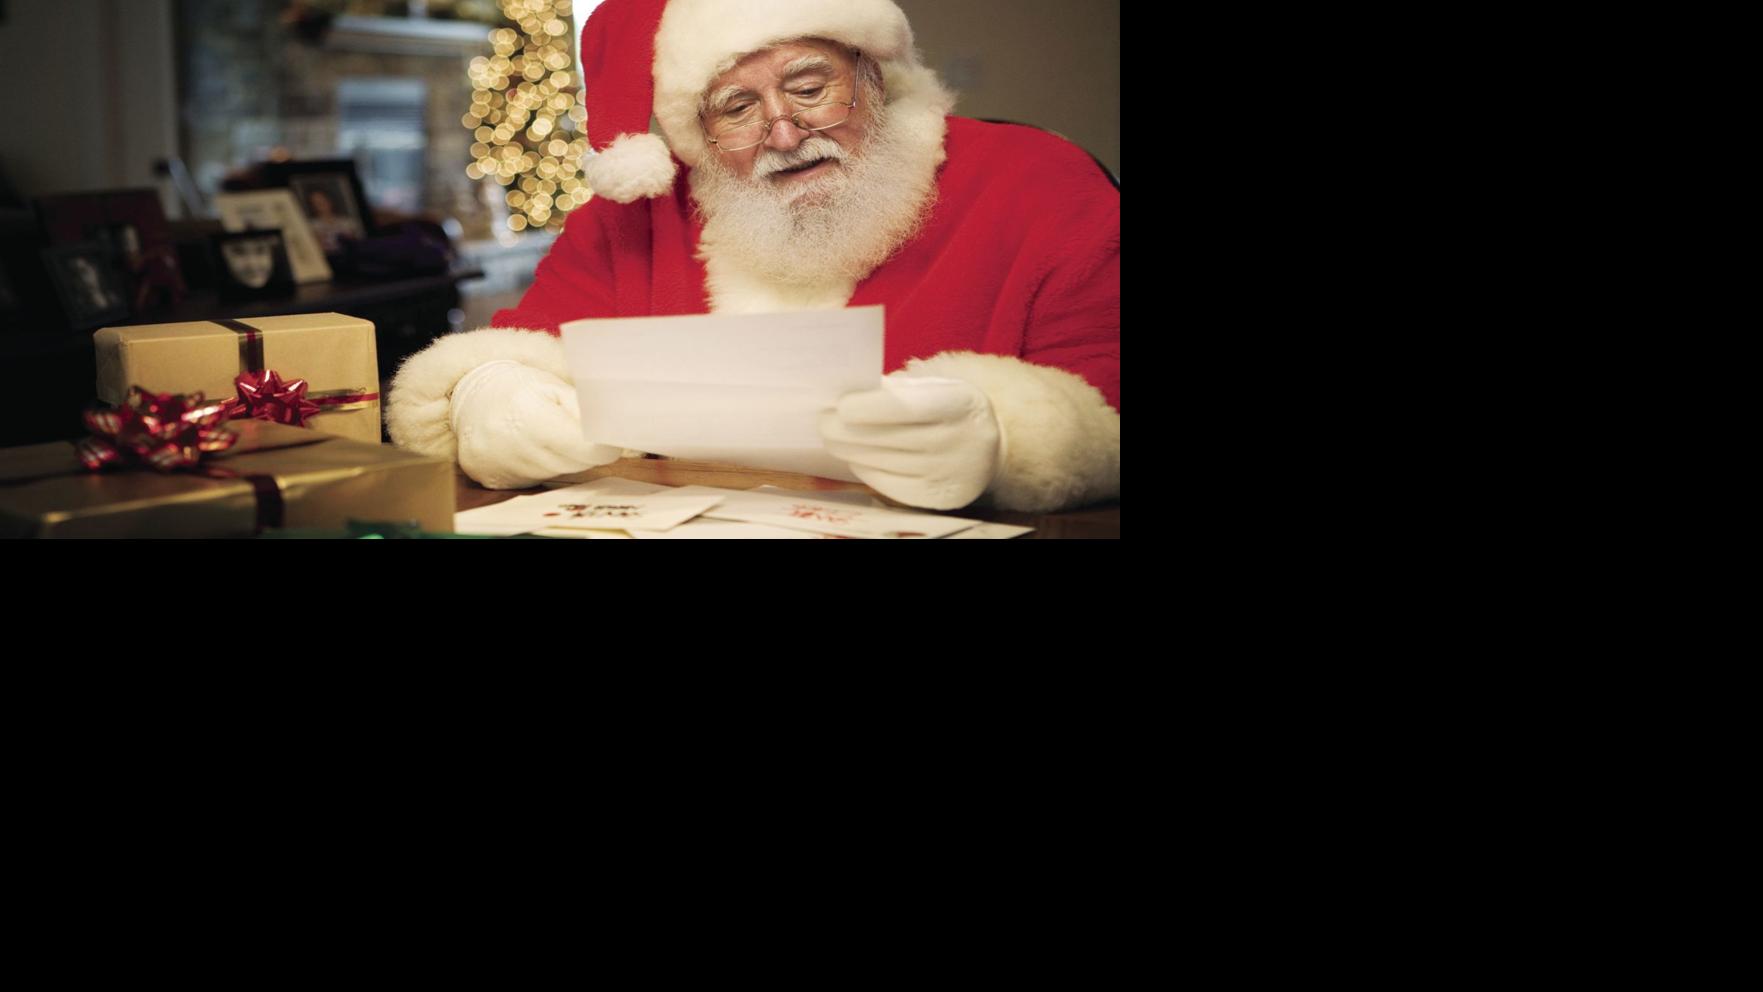 Find Your Child S List Letters To Santa 2018 Local Herald Review Com - jelly playing roblox with santa